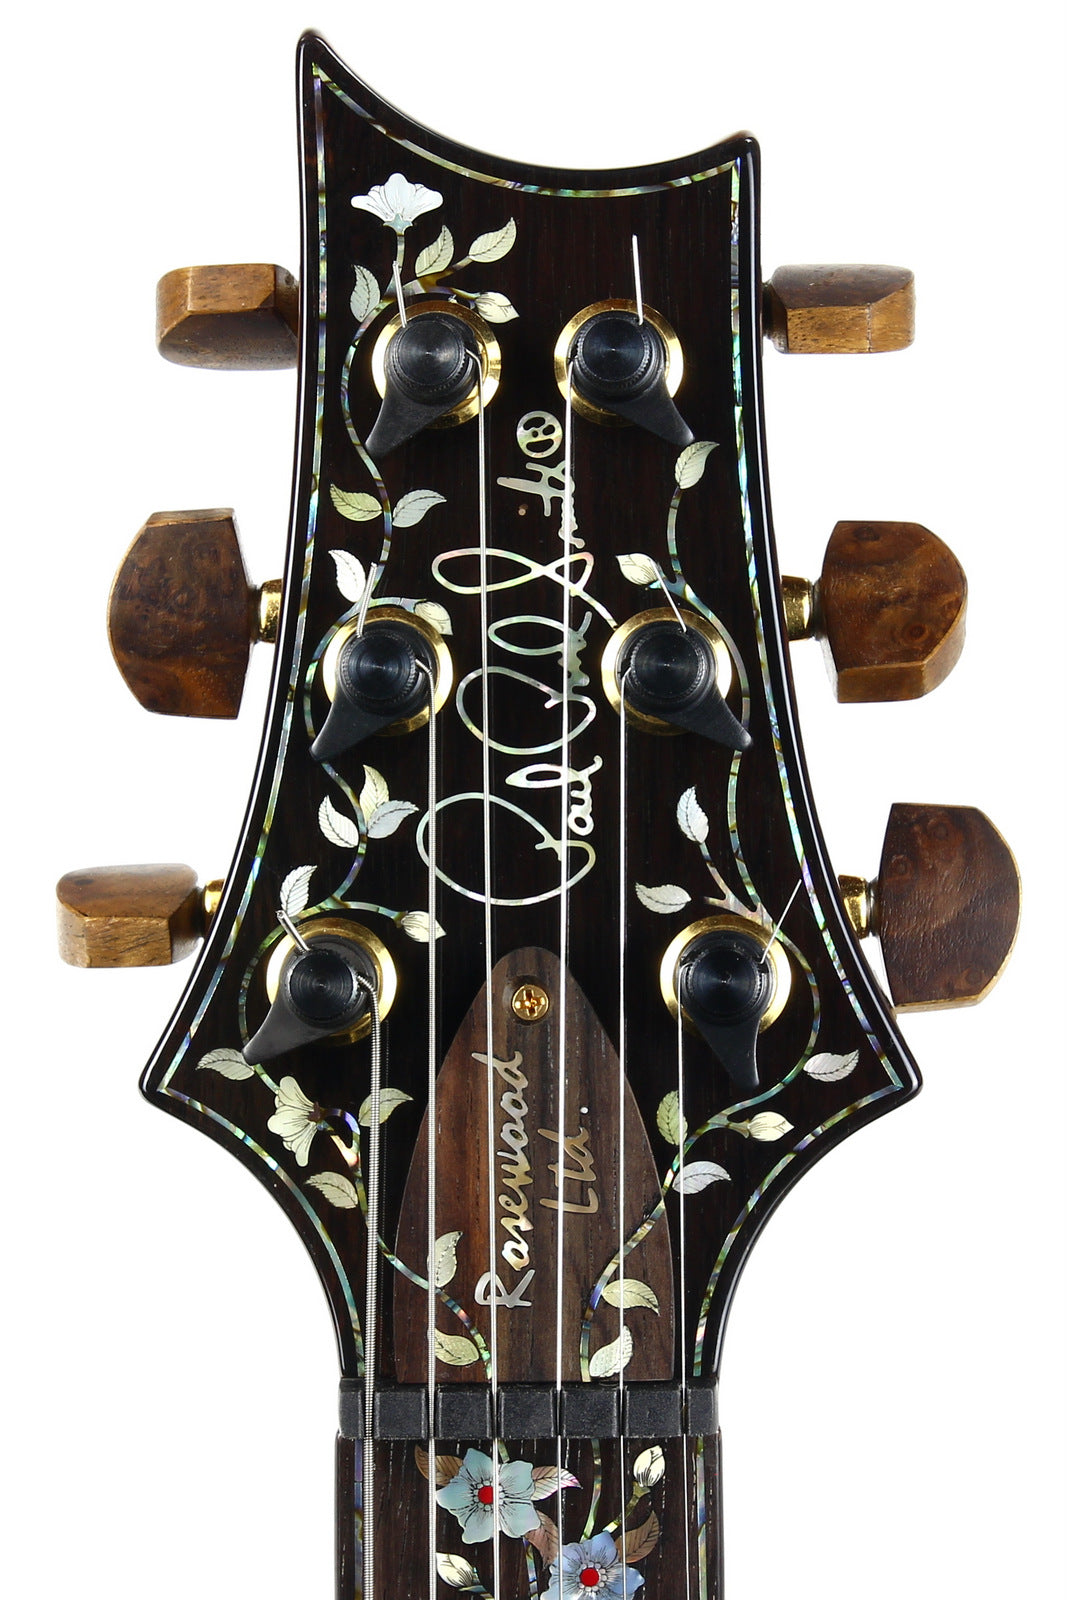 PRS Paul Reed Smith headstock with brand logo vine inlays